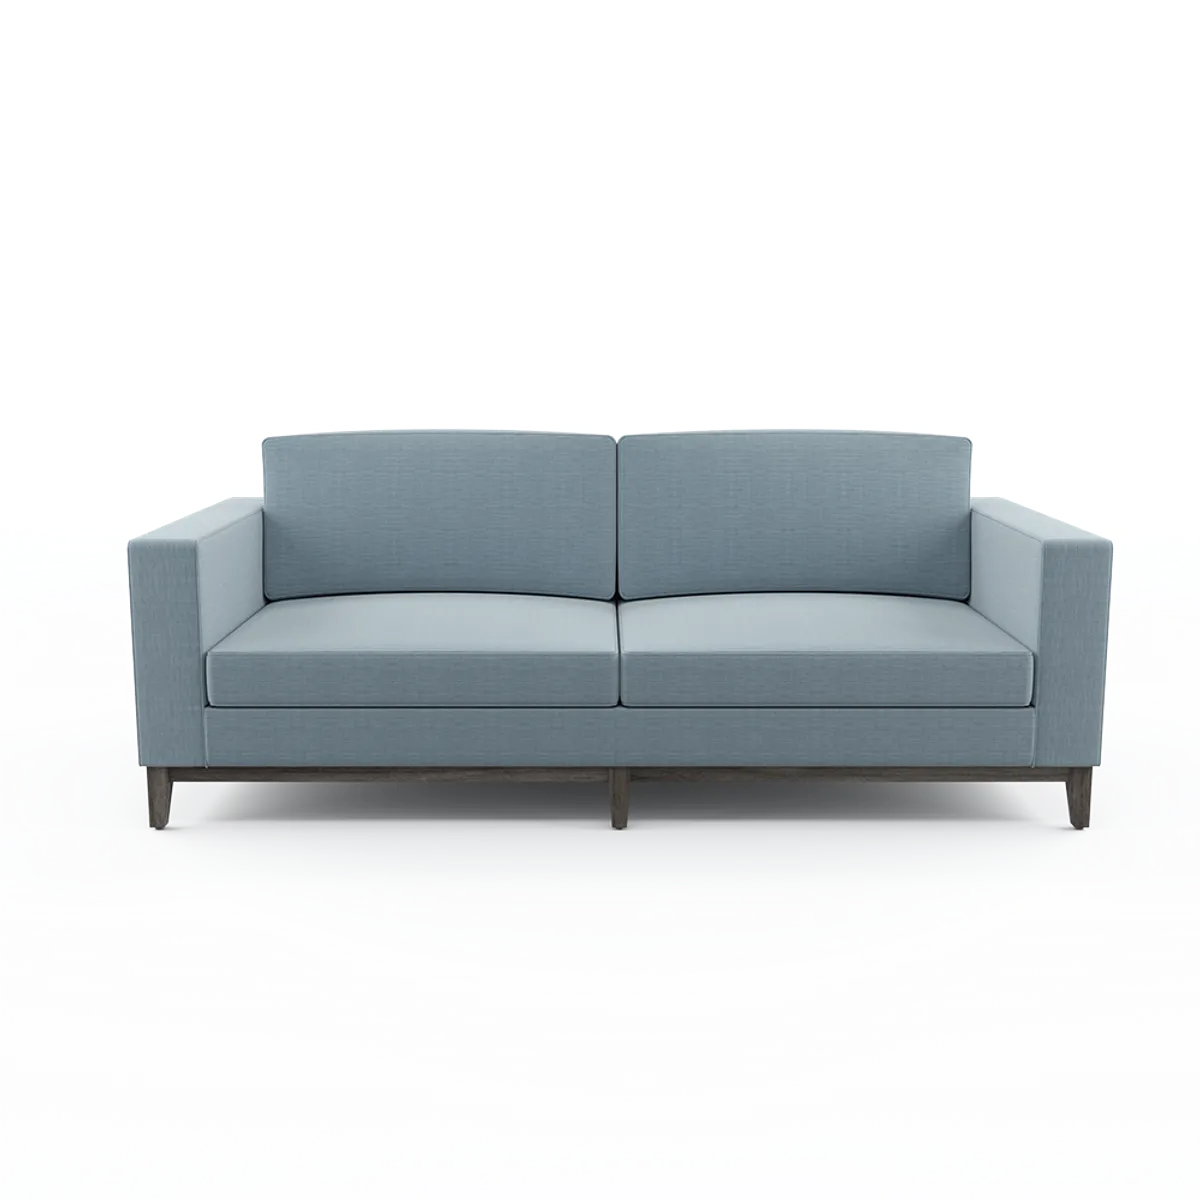 Quebec Sofa 3 Seater 2 By Inside Out Contracts